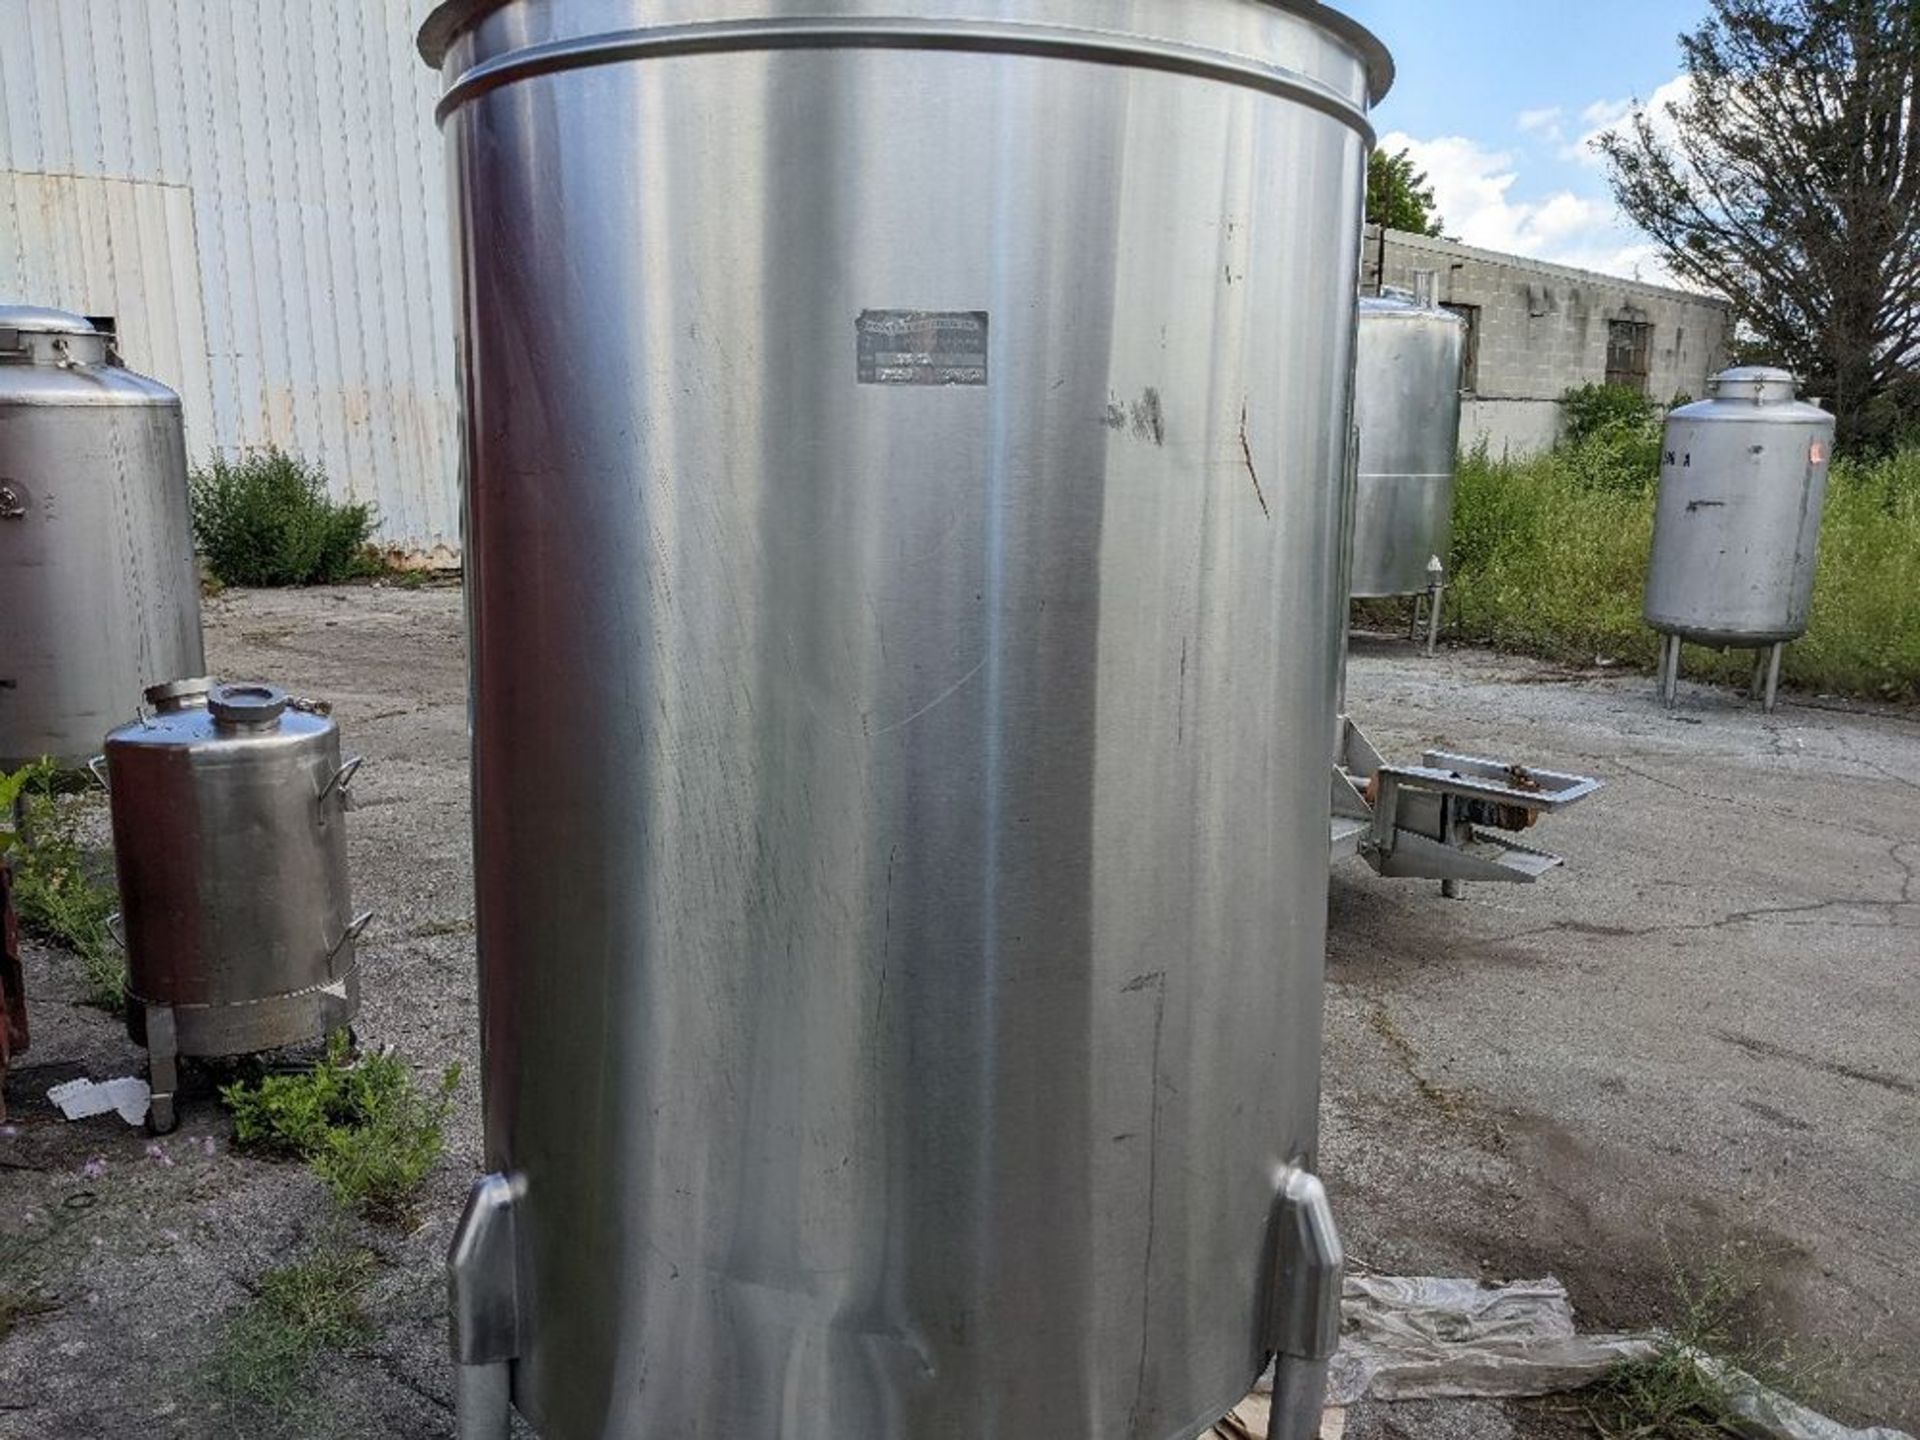 Qty (1) Potter and Rayfield Single Wall Vertical Agitated Stainless Steel Tank 312 Gallon - Open top - Image 2 of 4